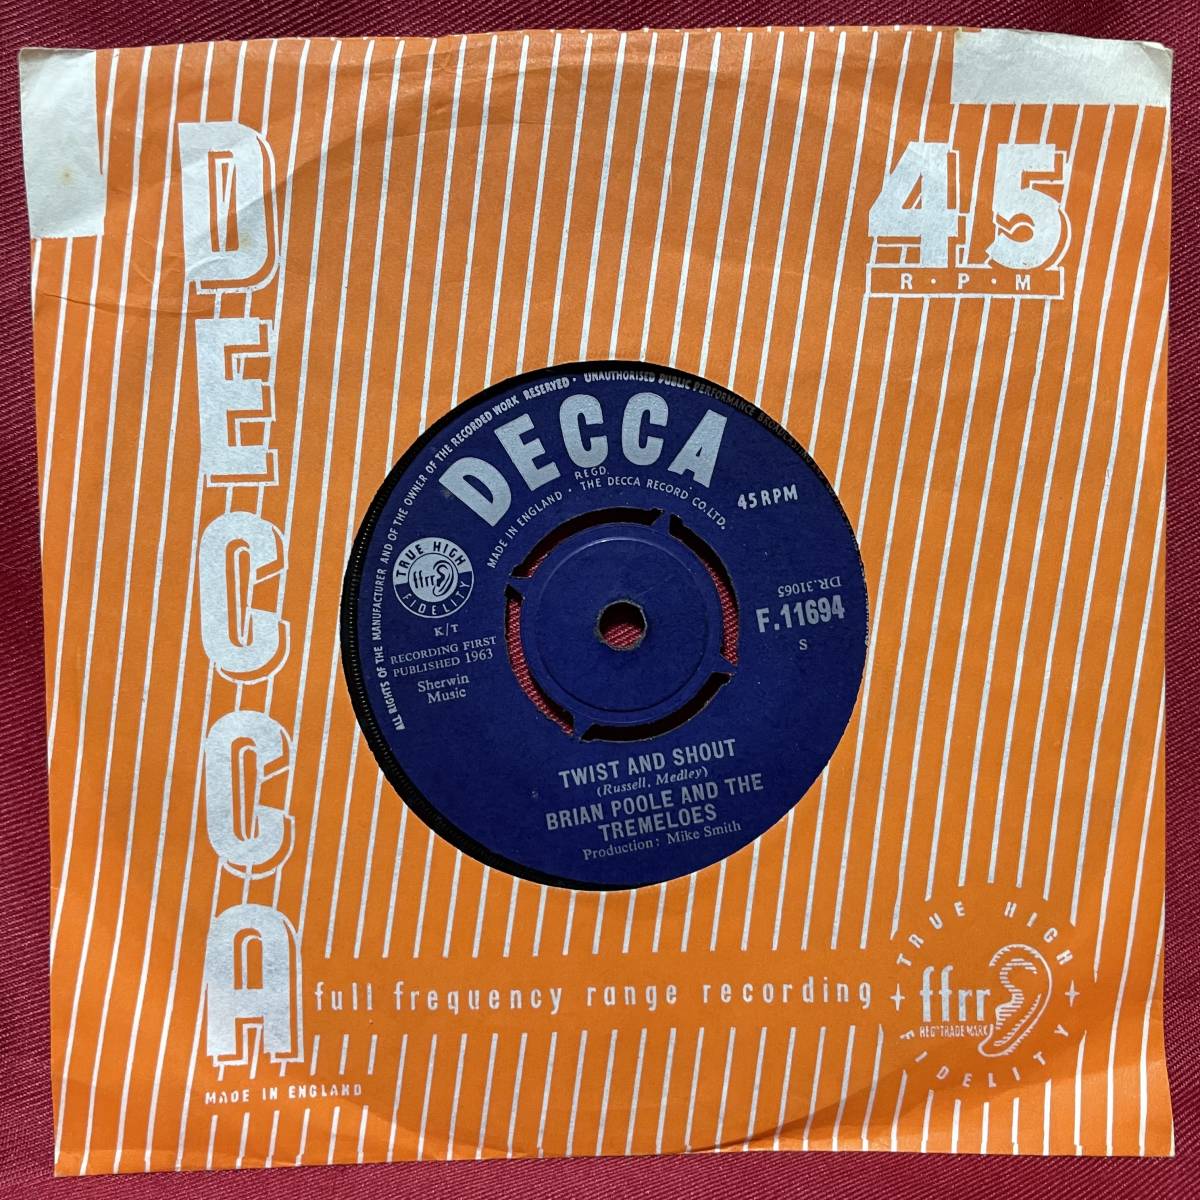 ◆UKorg7”s!◆BRIAN POOLE & THE TREMELOES◆TWIST AND SHOUT◆_画像3